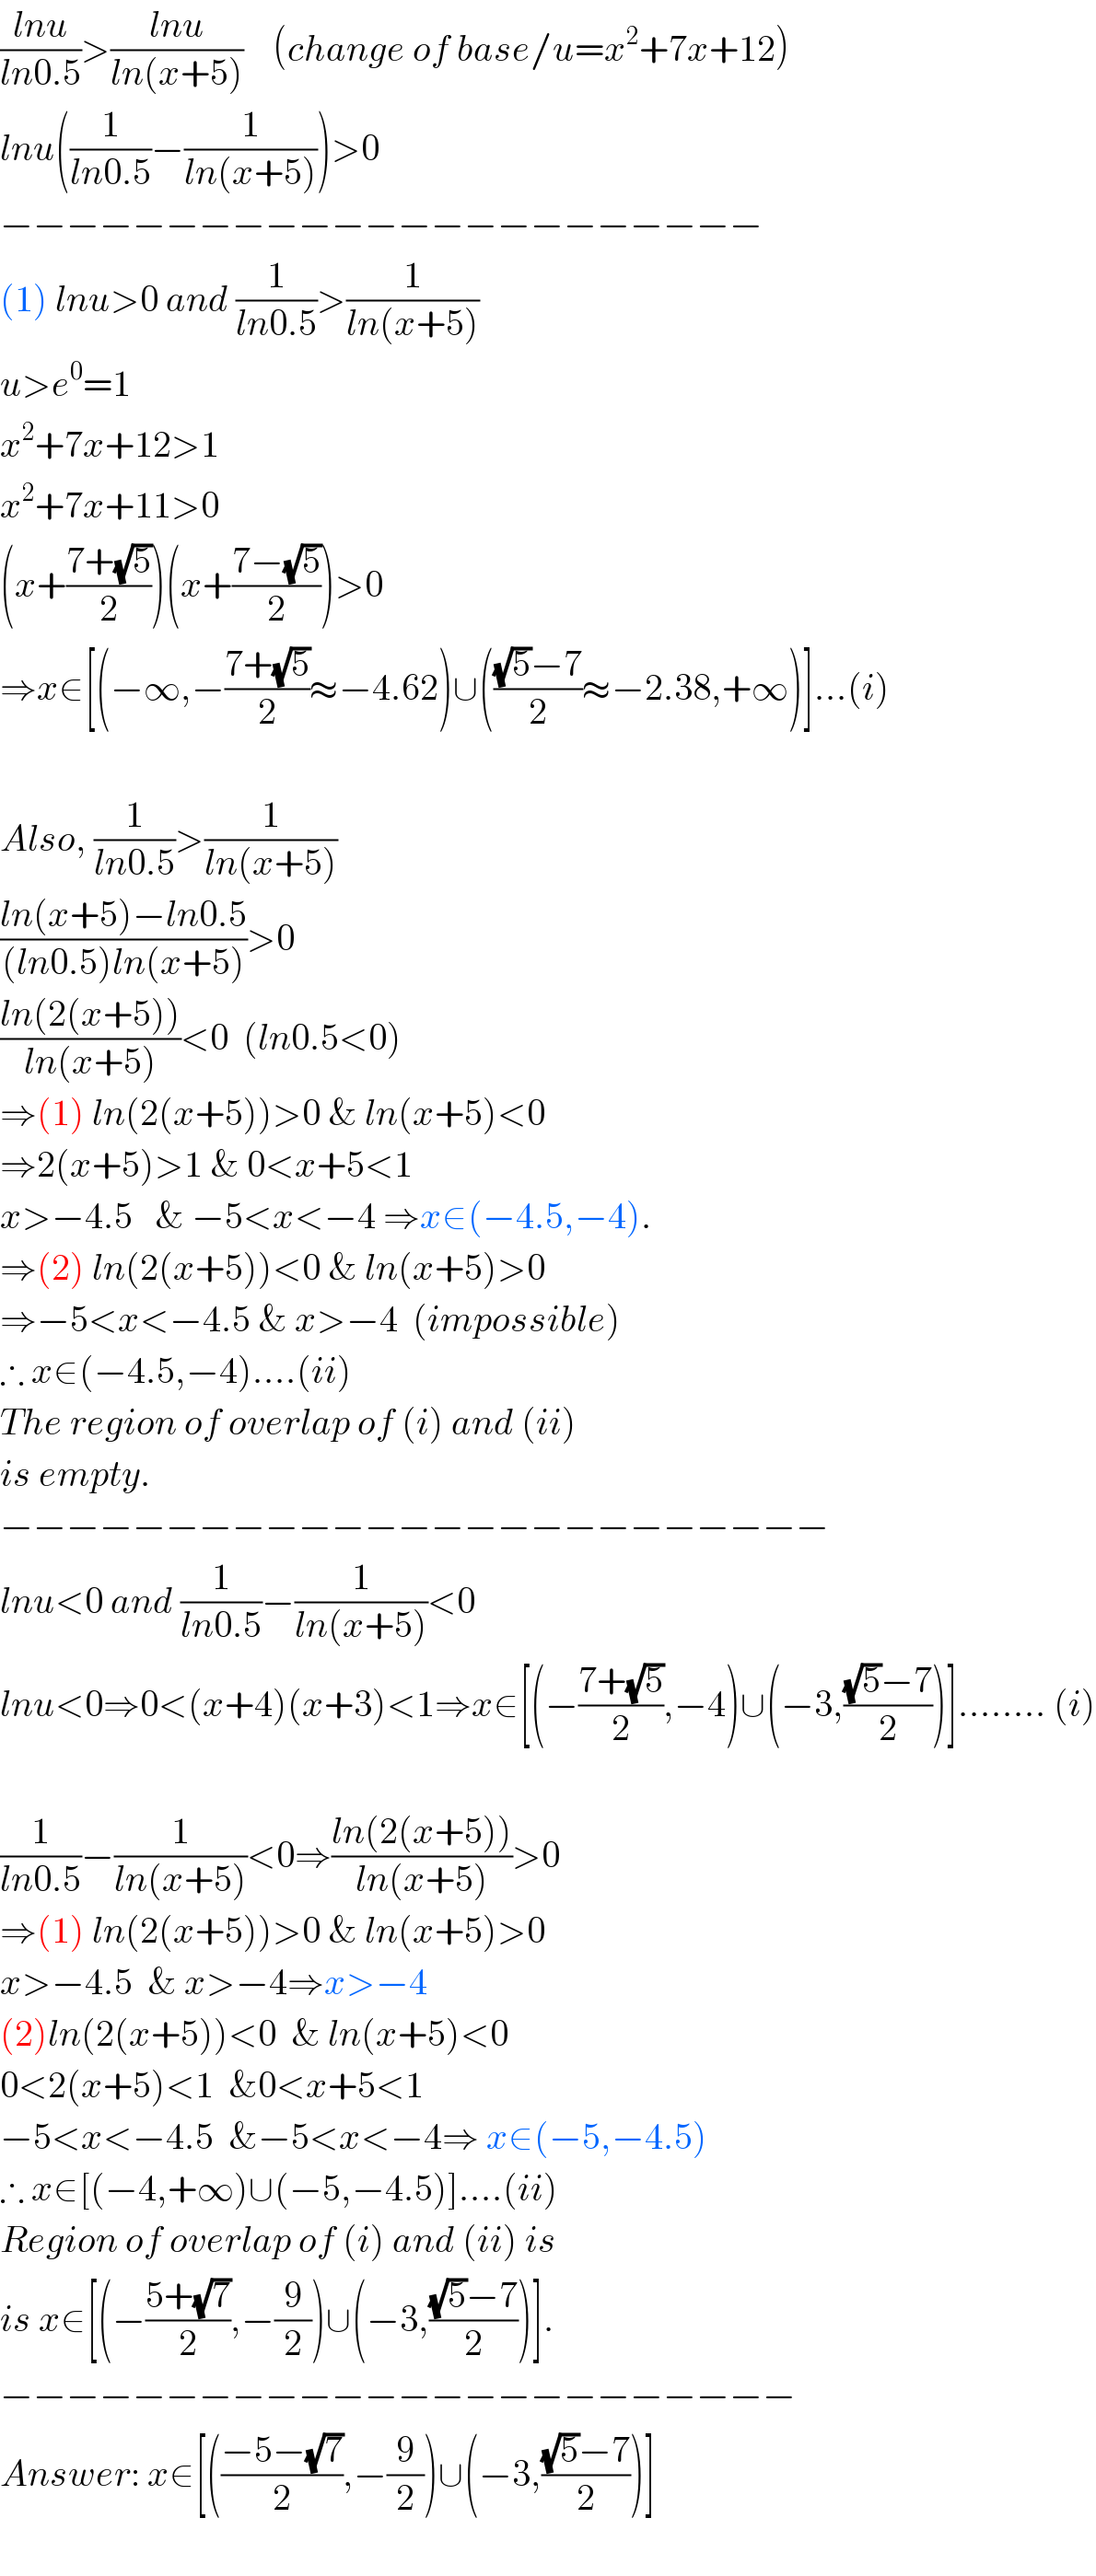 ((lnu)/(ln0.5))>((lnu)/(ln(x+5)))    (change of base/u=x^2 +7x+12)  lnu((1/(ln0.5))−(1/(ln(x+5))))>0  −−−−−−−−−−−−−−−−−−−−−−−  (1) lnu>0 and (1/(ln0.5))>(1/(ln(x+5)))  u>e^0 =1                       x^2 +7x+12>1  x^2 +7x+11>0  (x+((7+(√5))/2))(x+((7−(√5))/2))>0  ⇒x∈[(−∞,−((7+(√5))/2)≈−4.62)∪((((√5)−7)/2)≈−2.38,+∞)]...(i)    Also, (1/(ln0.5))>(1/(ln(x+5)))  ((ln(x+5)−ln0.5)/((ln0.5)ln(x+5)))>0  ((ln(2(x+5)))/(ln(x+5)))<0  (ln0.5<0)  ⇒(1) ln(2(x+5))>0 & ln(x+5)<0  ⇒2(x+5)>1 & 0<x+5<1  x>−4.5   & −5<x<−4 ⇒x∈(−4.5,−4).  ⇒(2) ln(2(x+5))<0 & ln(x+5)>0  ⇒−5<x<−4.5 & x>−4  (impossible)  ∴ x∈(−4.5,−4)....(ii)  The region of overlap of (i) and (ii)  is empty.  −−−−−−−−−−−−−−−−−−−−−−−−−  lnu<0 and (1/(ln0.5))−(1/(ln(x+5)))<0  lnu<0⇒0<(x+4)(x+3)<1⇒x∈[(−((7+(√5))/2),−4)∪(−3,(((√5)−7)/2))]........ (i)    (1/(ln0.5))−(1/(ln(x+5)))<0⇒((ln(2(x+5)))/(ln(x+5)))>0  ⇒(1) ln(2(x+5))>0 & ln(x+5)>0  x>−4.5  & x>−4⇒x>−4  (2)ln(2(x+5))<0  & ln(x+5)<0  0<2(x+5)<1  &0<x+5<1  −5<x<−4.5  &−5<x<−4⇒ x∈(−5,−4.5)  ∴ x∈[(−4,+∞)∪(−5,−4.5)]....(ii)  Region of overlap of (i) and (ii) is  is x∈[(−((5+(√7))/2),−(9/2))∪(−3,(((√5)−7)/2))].  −−−−−−−−−−−−−−−−−−−−−−−−  Answer: x∈[(((−5−(√7))/2),−(9/2))∪(−3,(((√5)−7)/2))]    